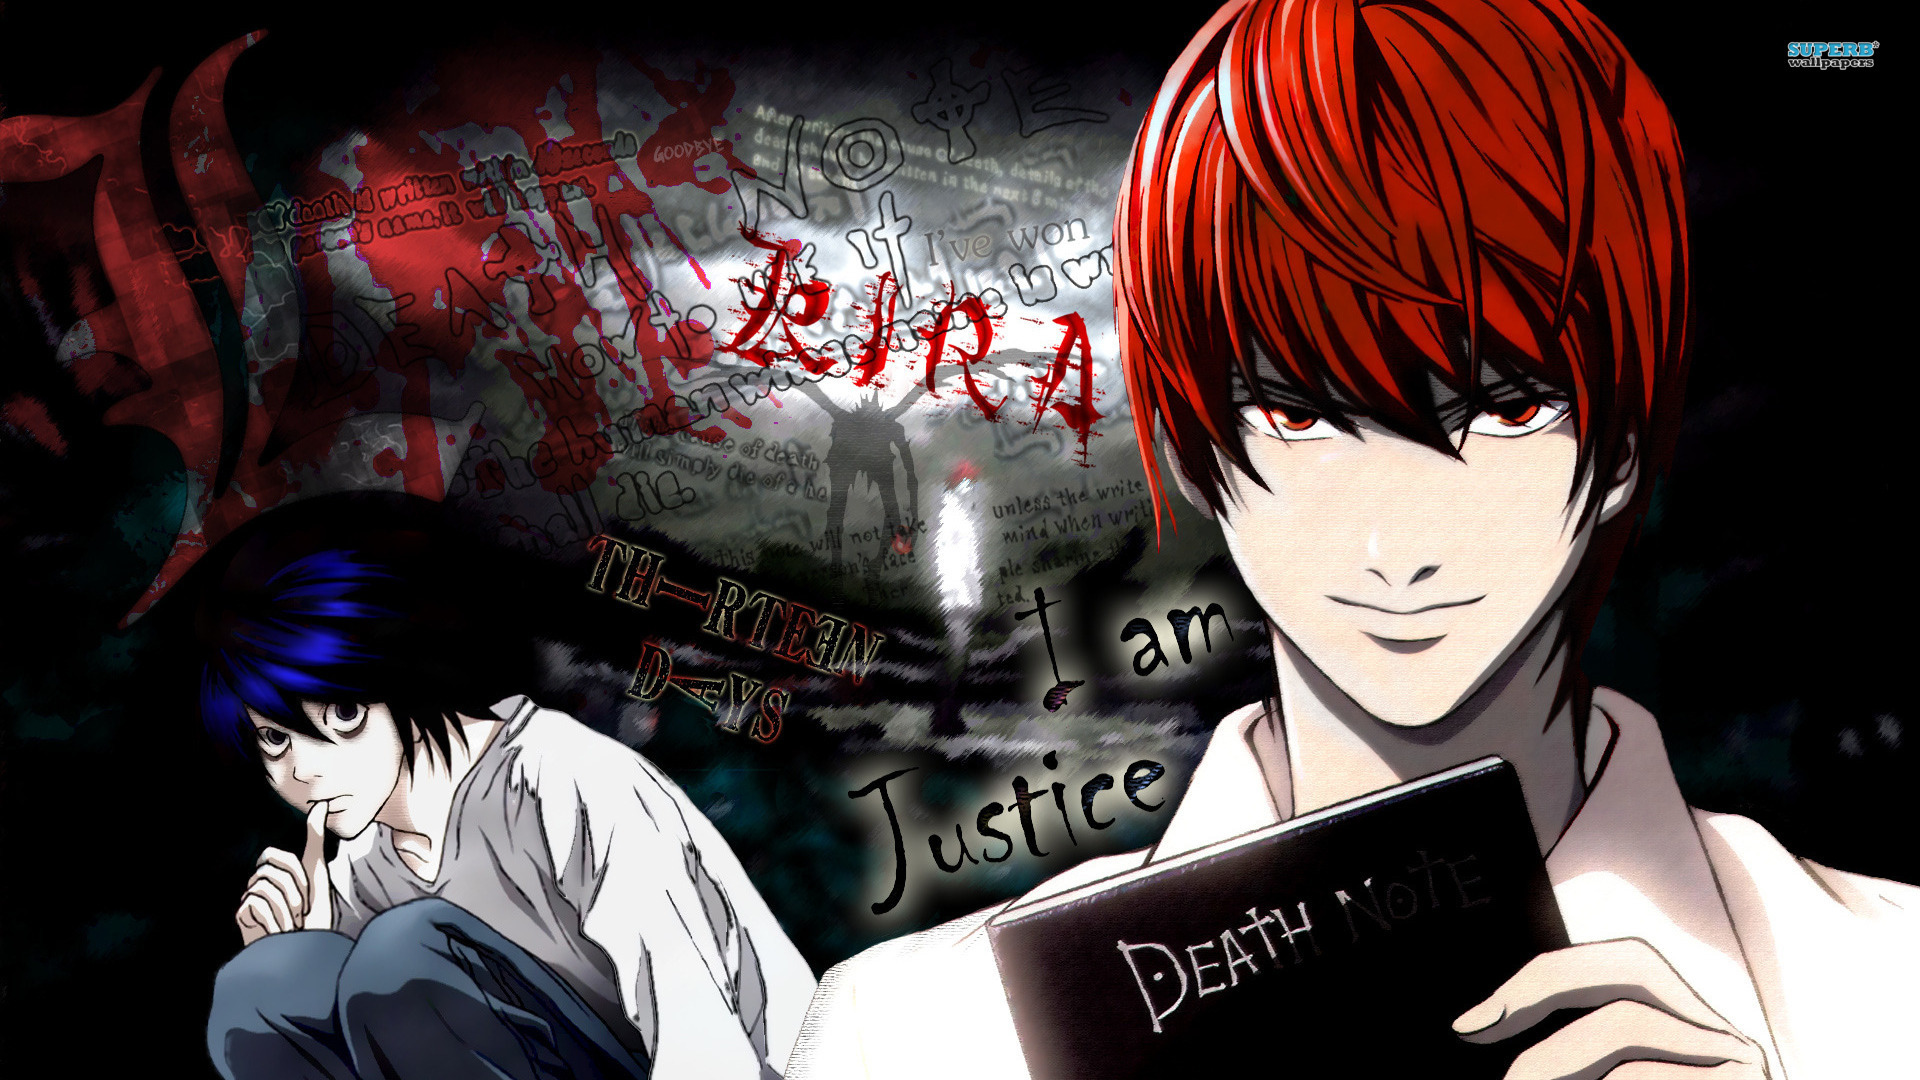 Death Note Wallpaper Looking for the best near death note wallpaper? death note wallpaper